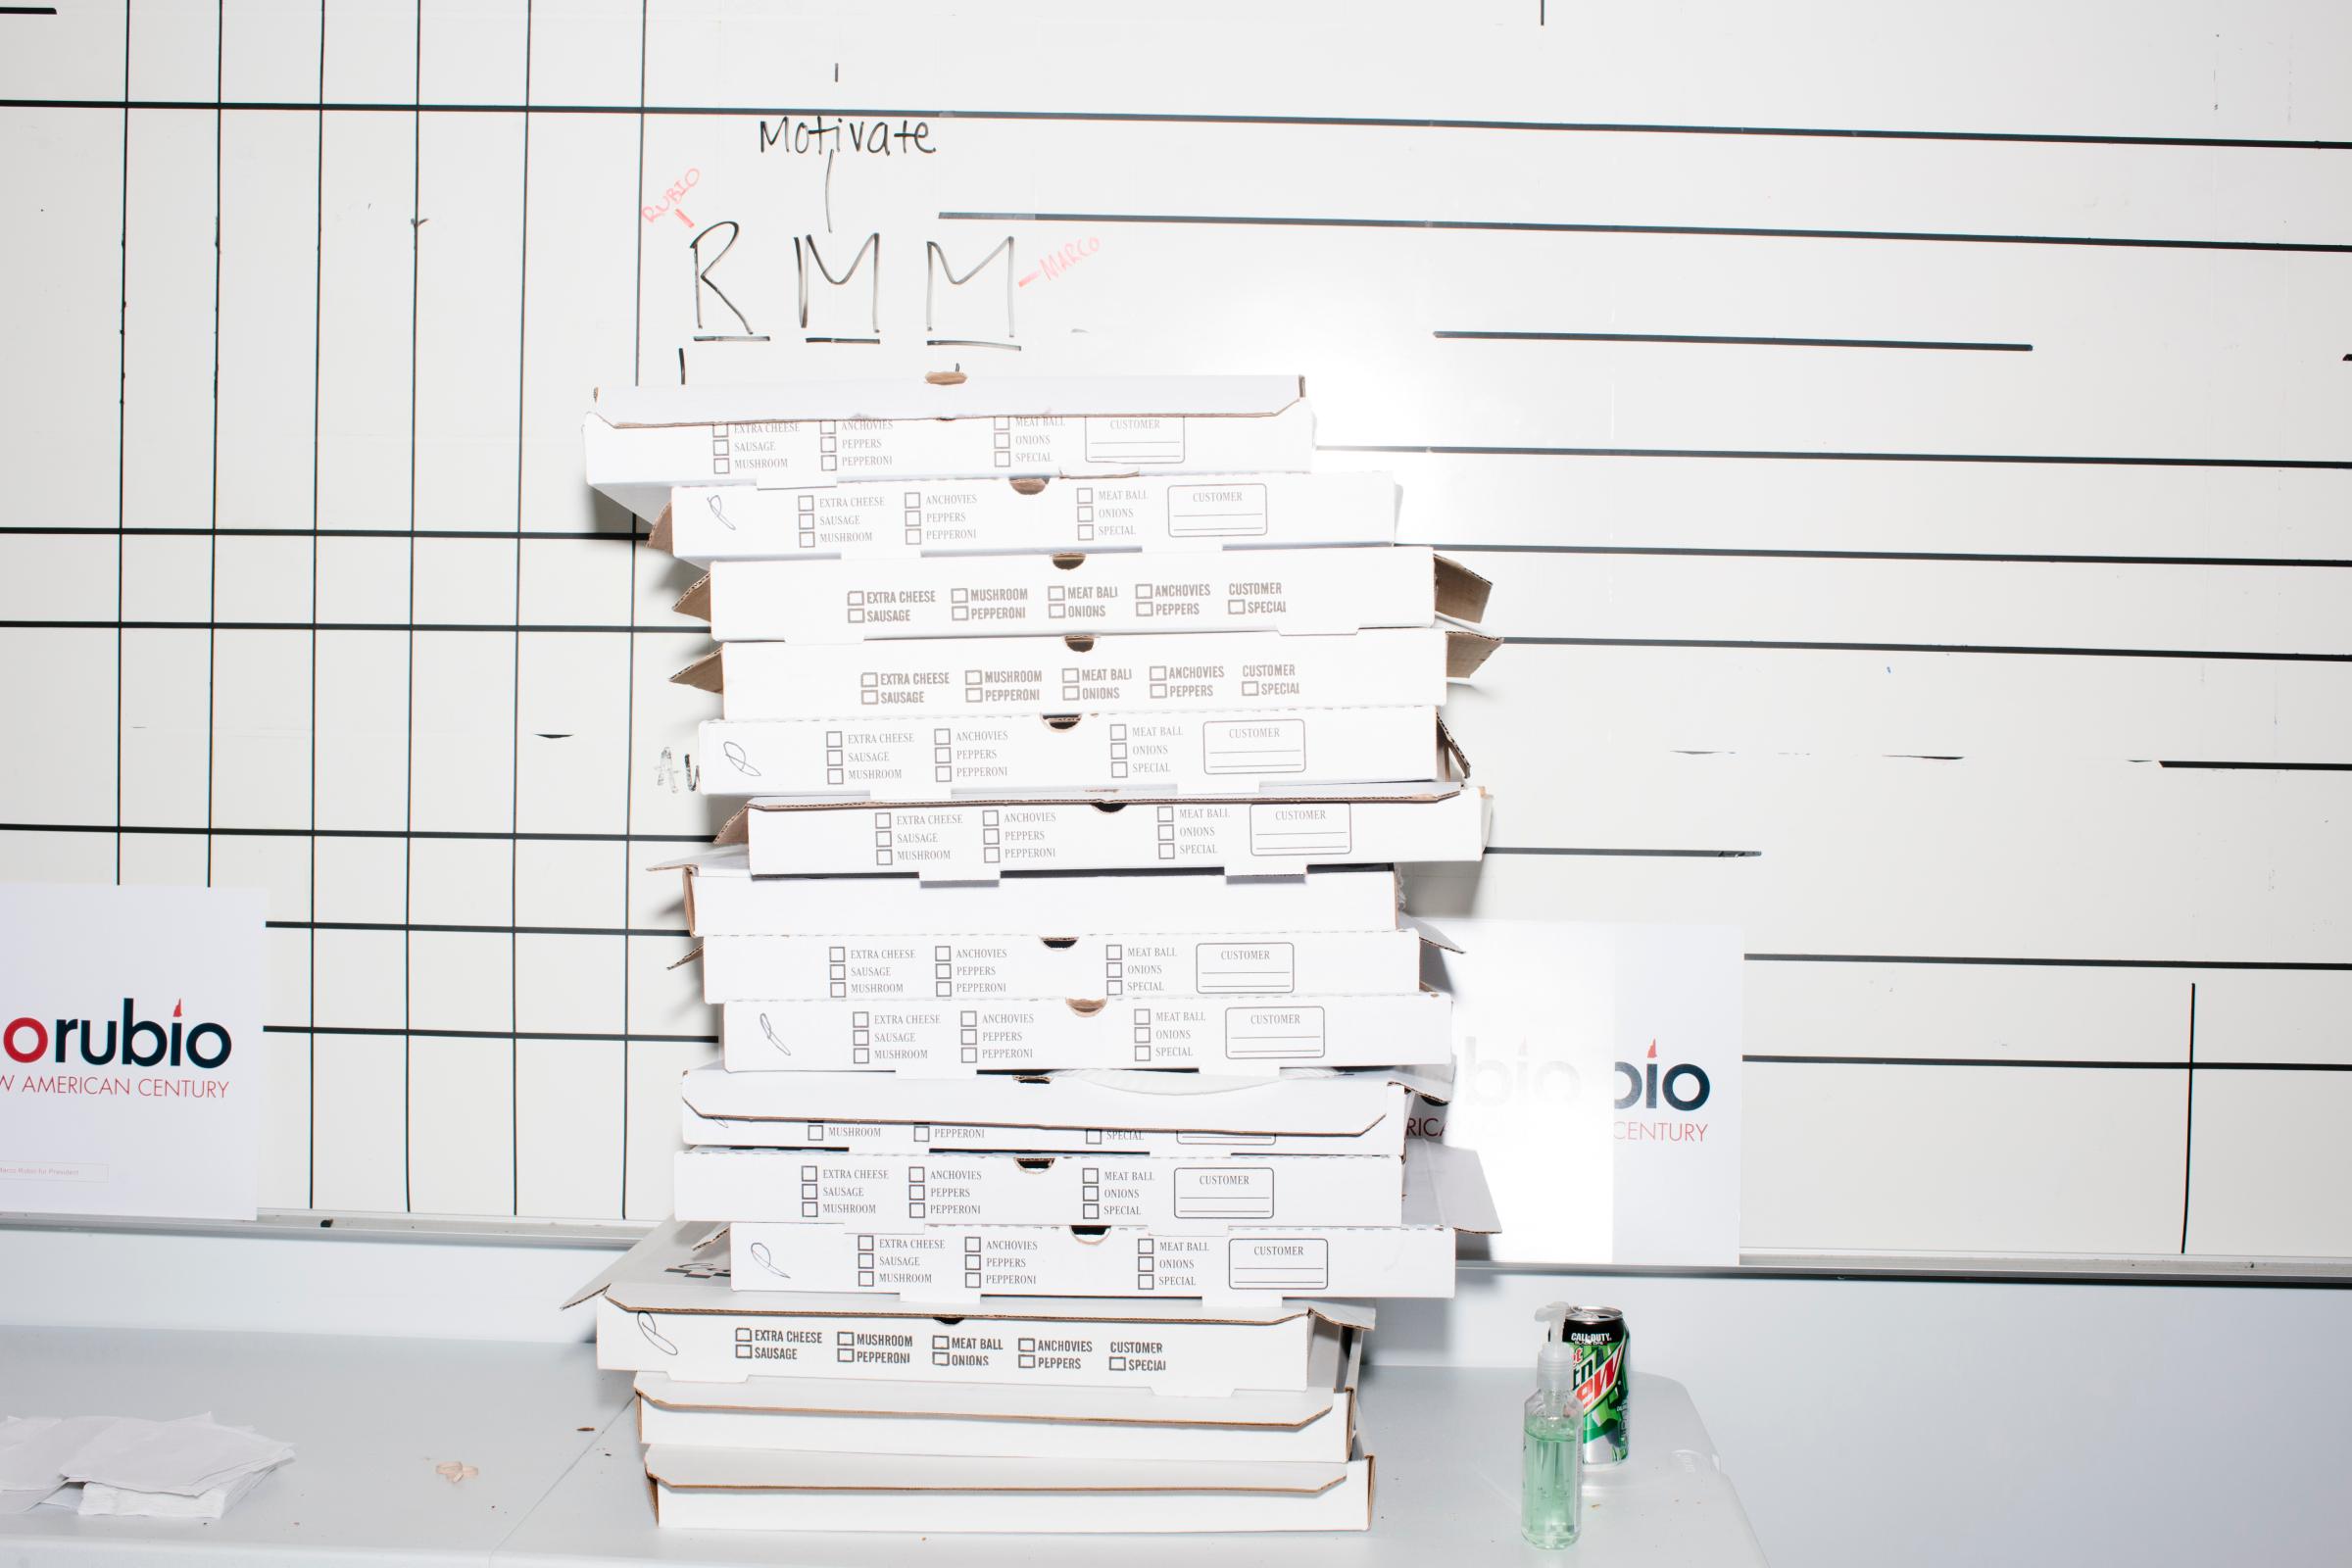 Pizza boxes are stacked in the campaign headquarters of Republican presidential candidate Marco Rubio in Manchester, New Hampshire. Rubio finished 5th in the primary, a disappointing finish after his strong placing in the Iowa caucus a week earlier.